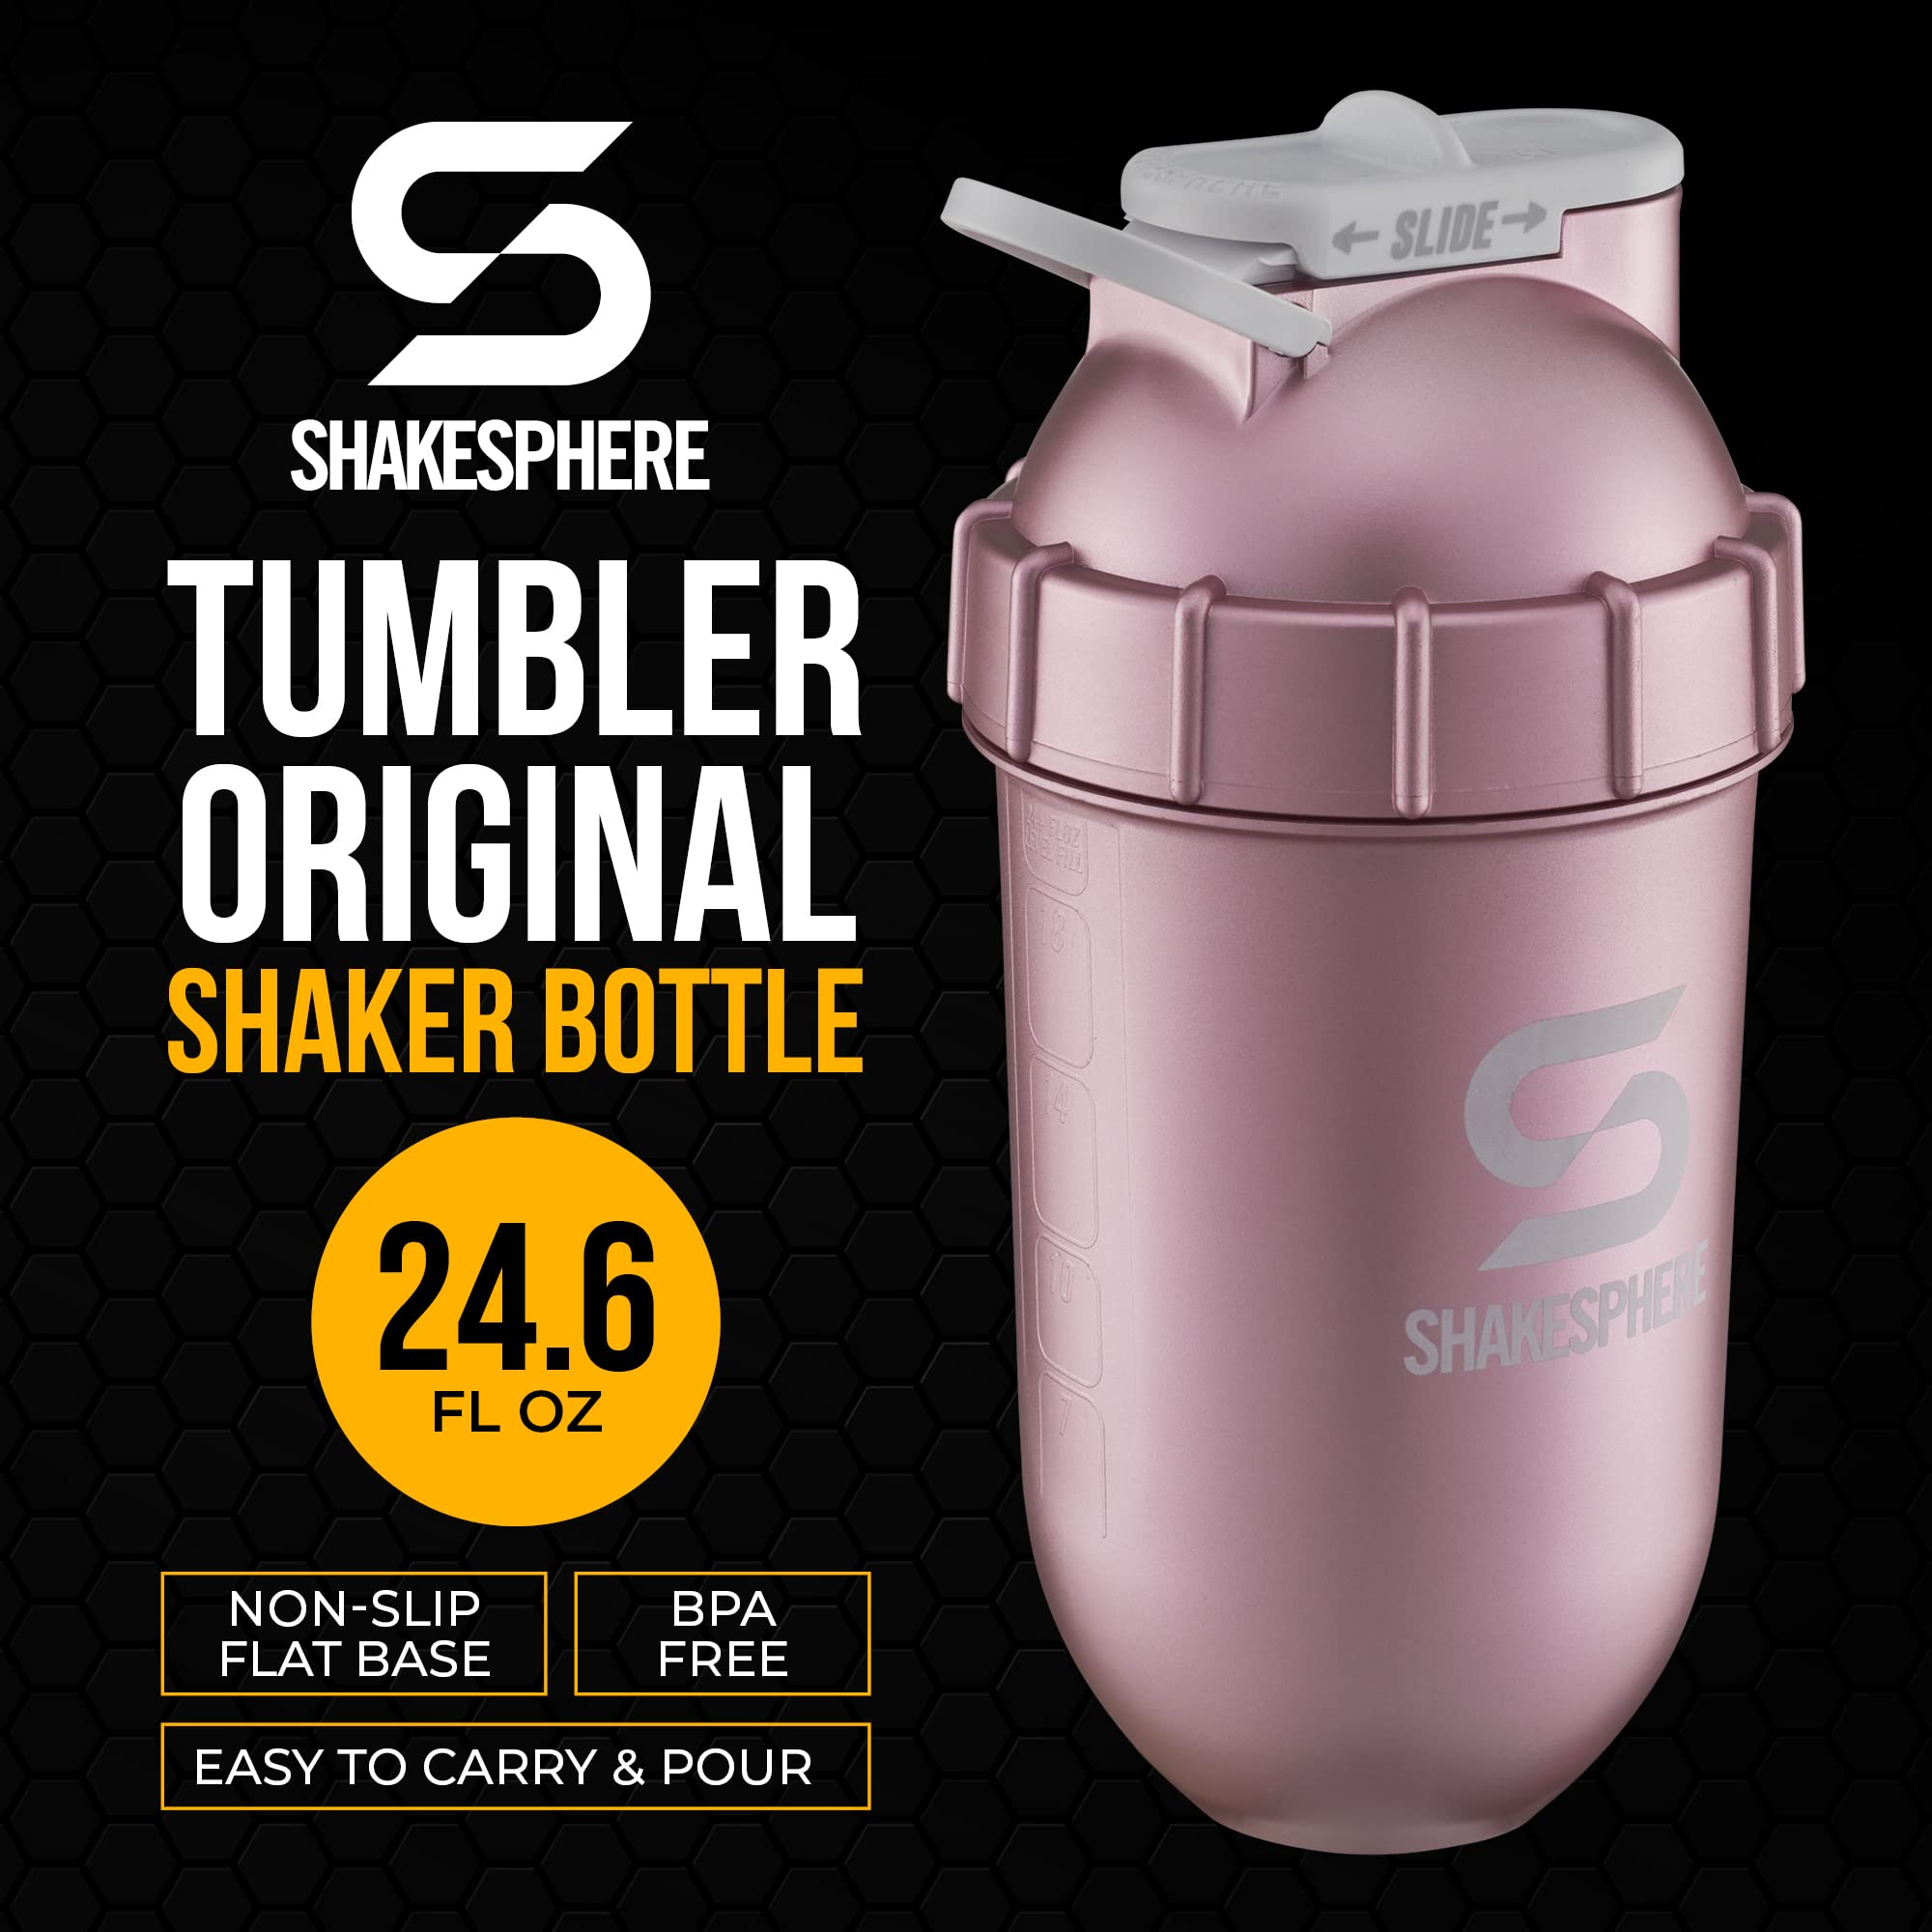 SHAKESPHERE Tumbler: Protein Shaker Bottle and Smoothie Cup, 24 oz - Bladeless Blender Cup Purees Raw Fruit with No Blending Ball - Drink Powder Mix Shake Mixer for Pre Workout, Gym (Matte Black)